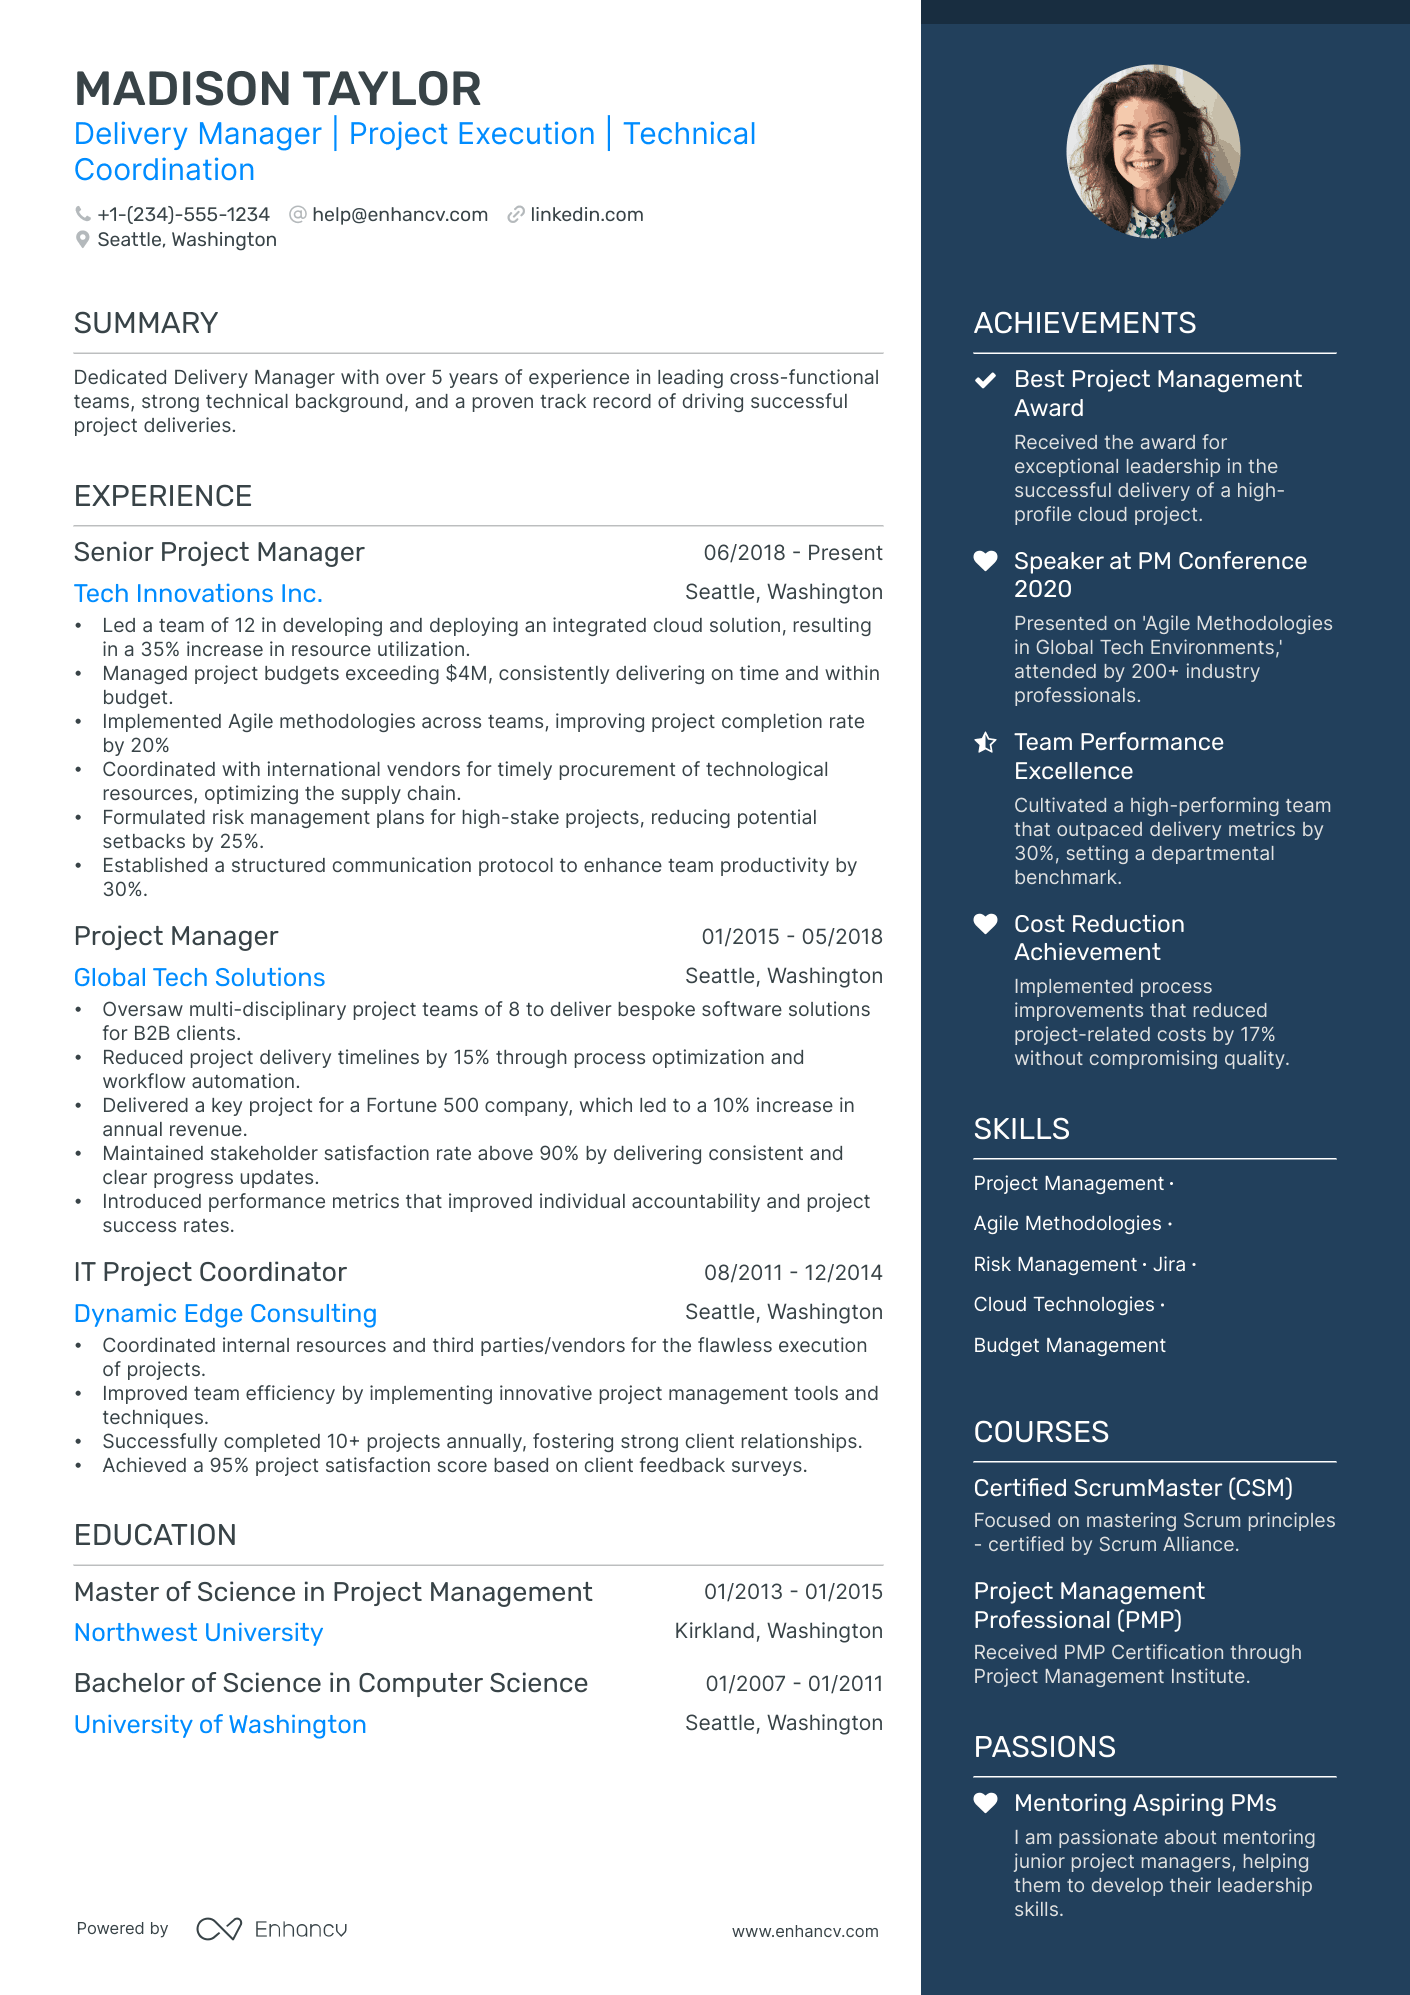 resume of it service delivery manager